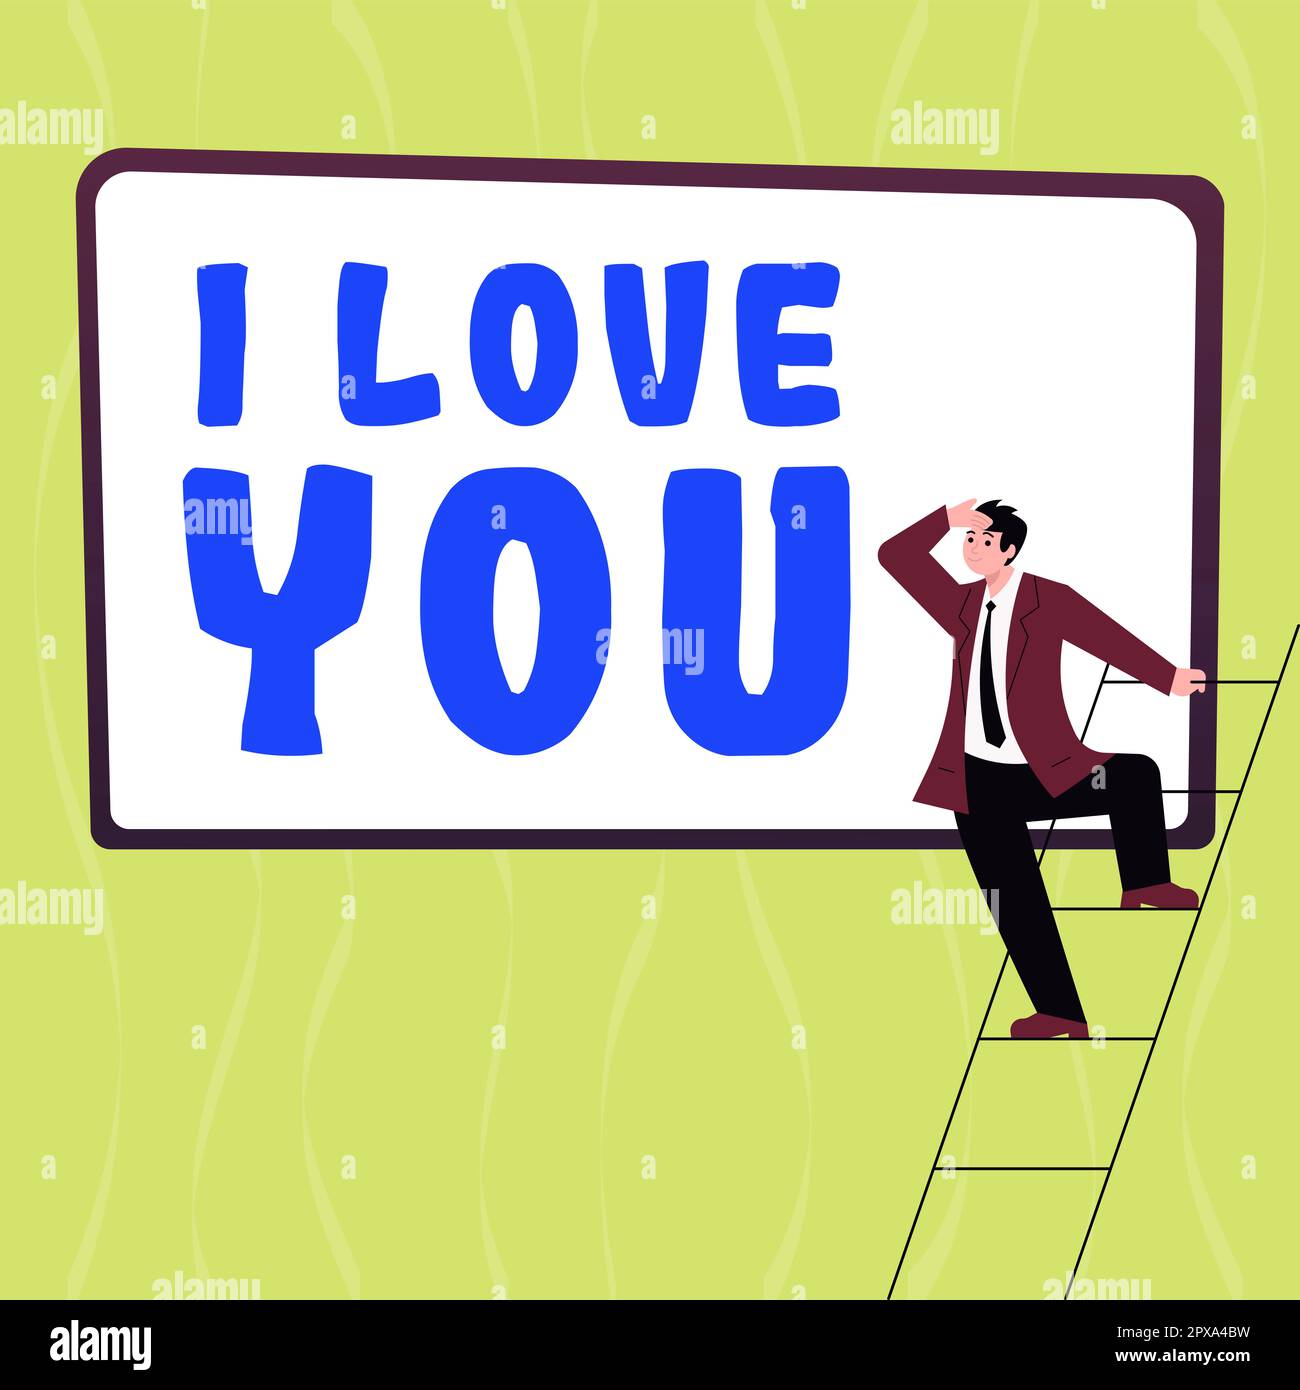 Text sign showing I Love You, Concept meaning Expressing romantic feelings for someone Positive emotion Stock Photo